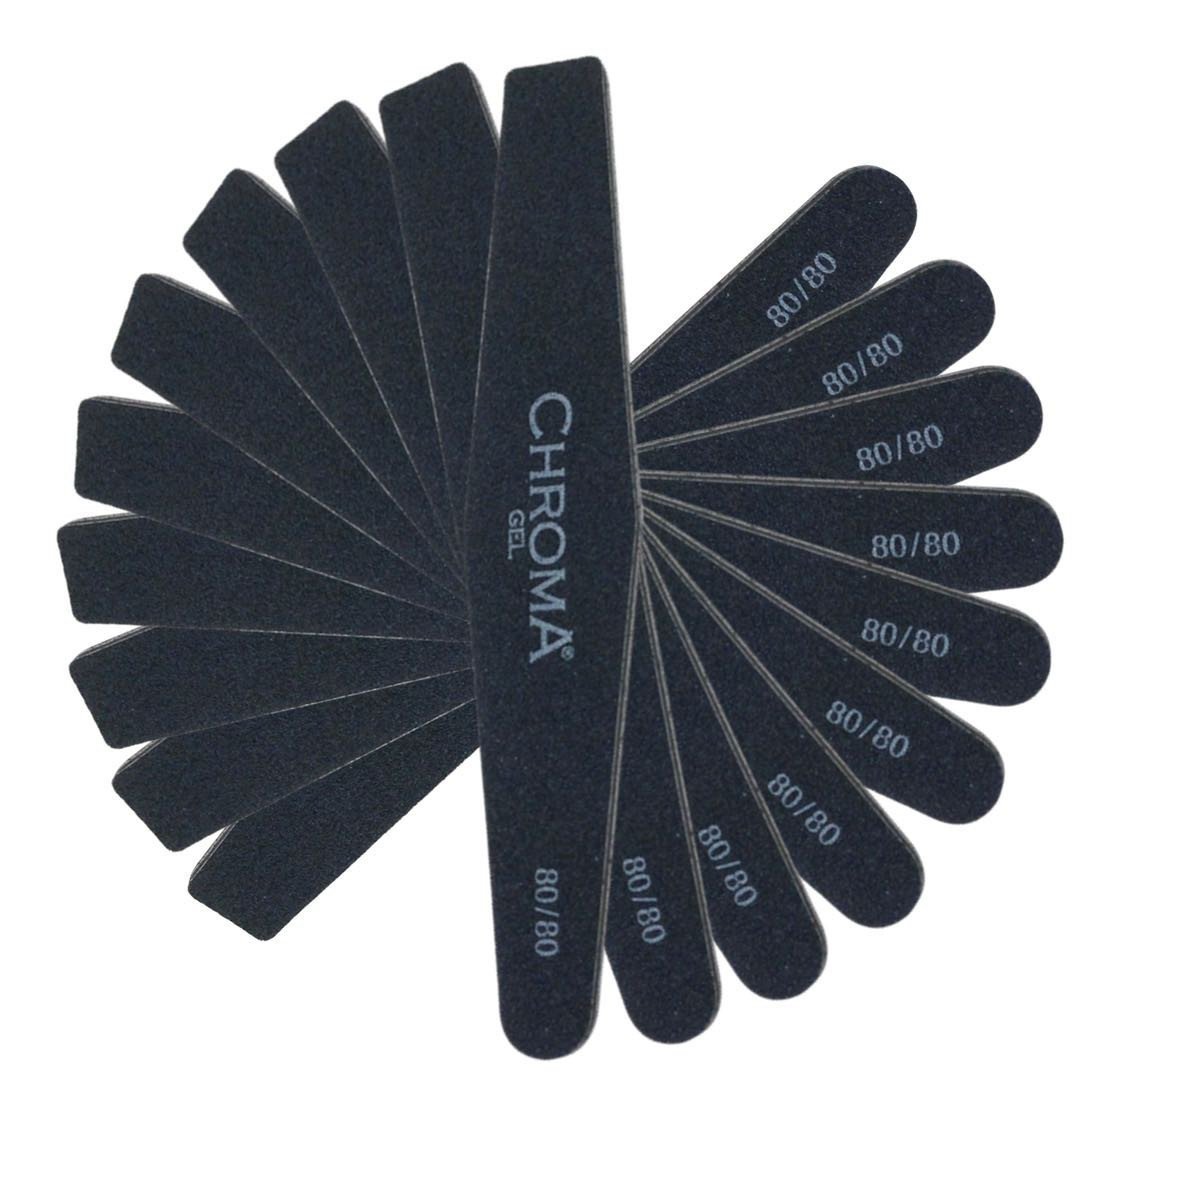 Pack of 12 Chroma Gel Nail Files - Professional Quality 80/80 Grit - beautyhair.co.ukChroma Gel